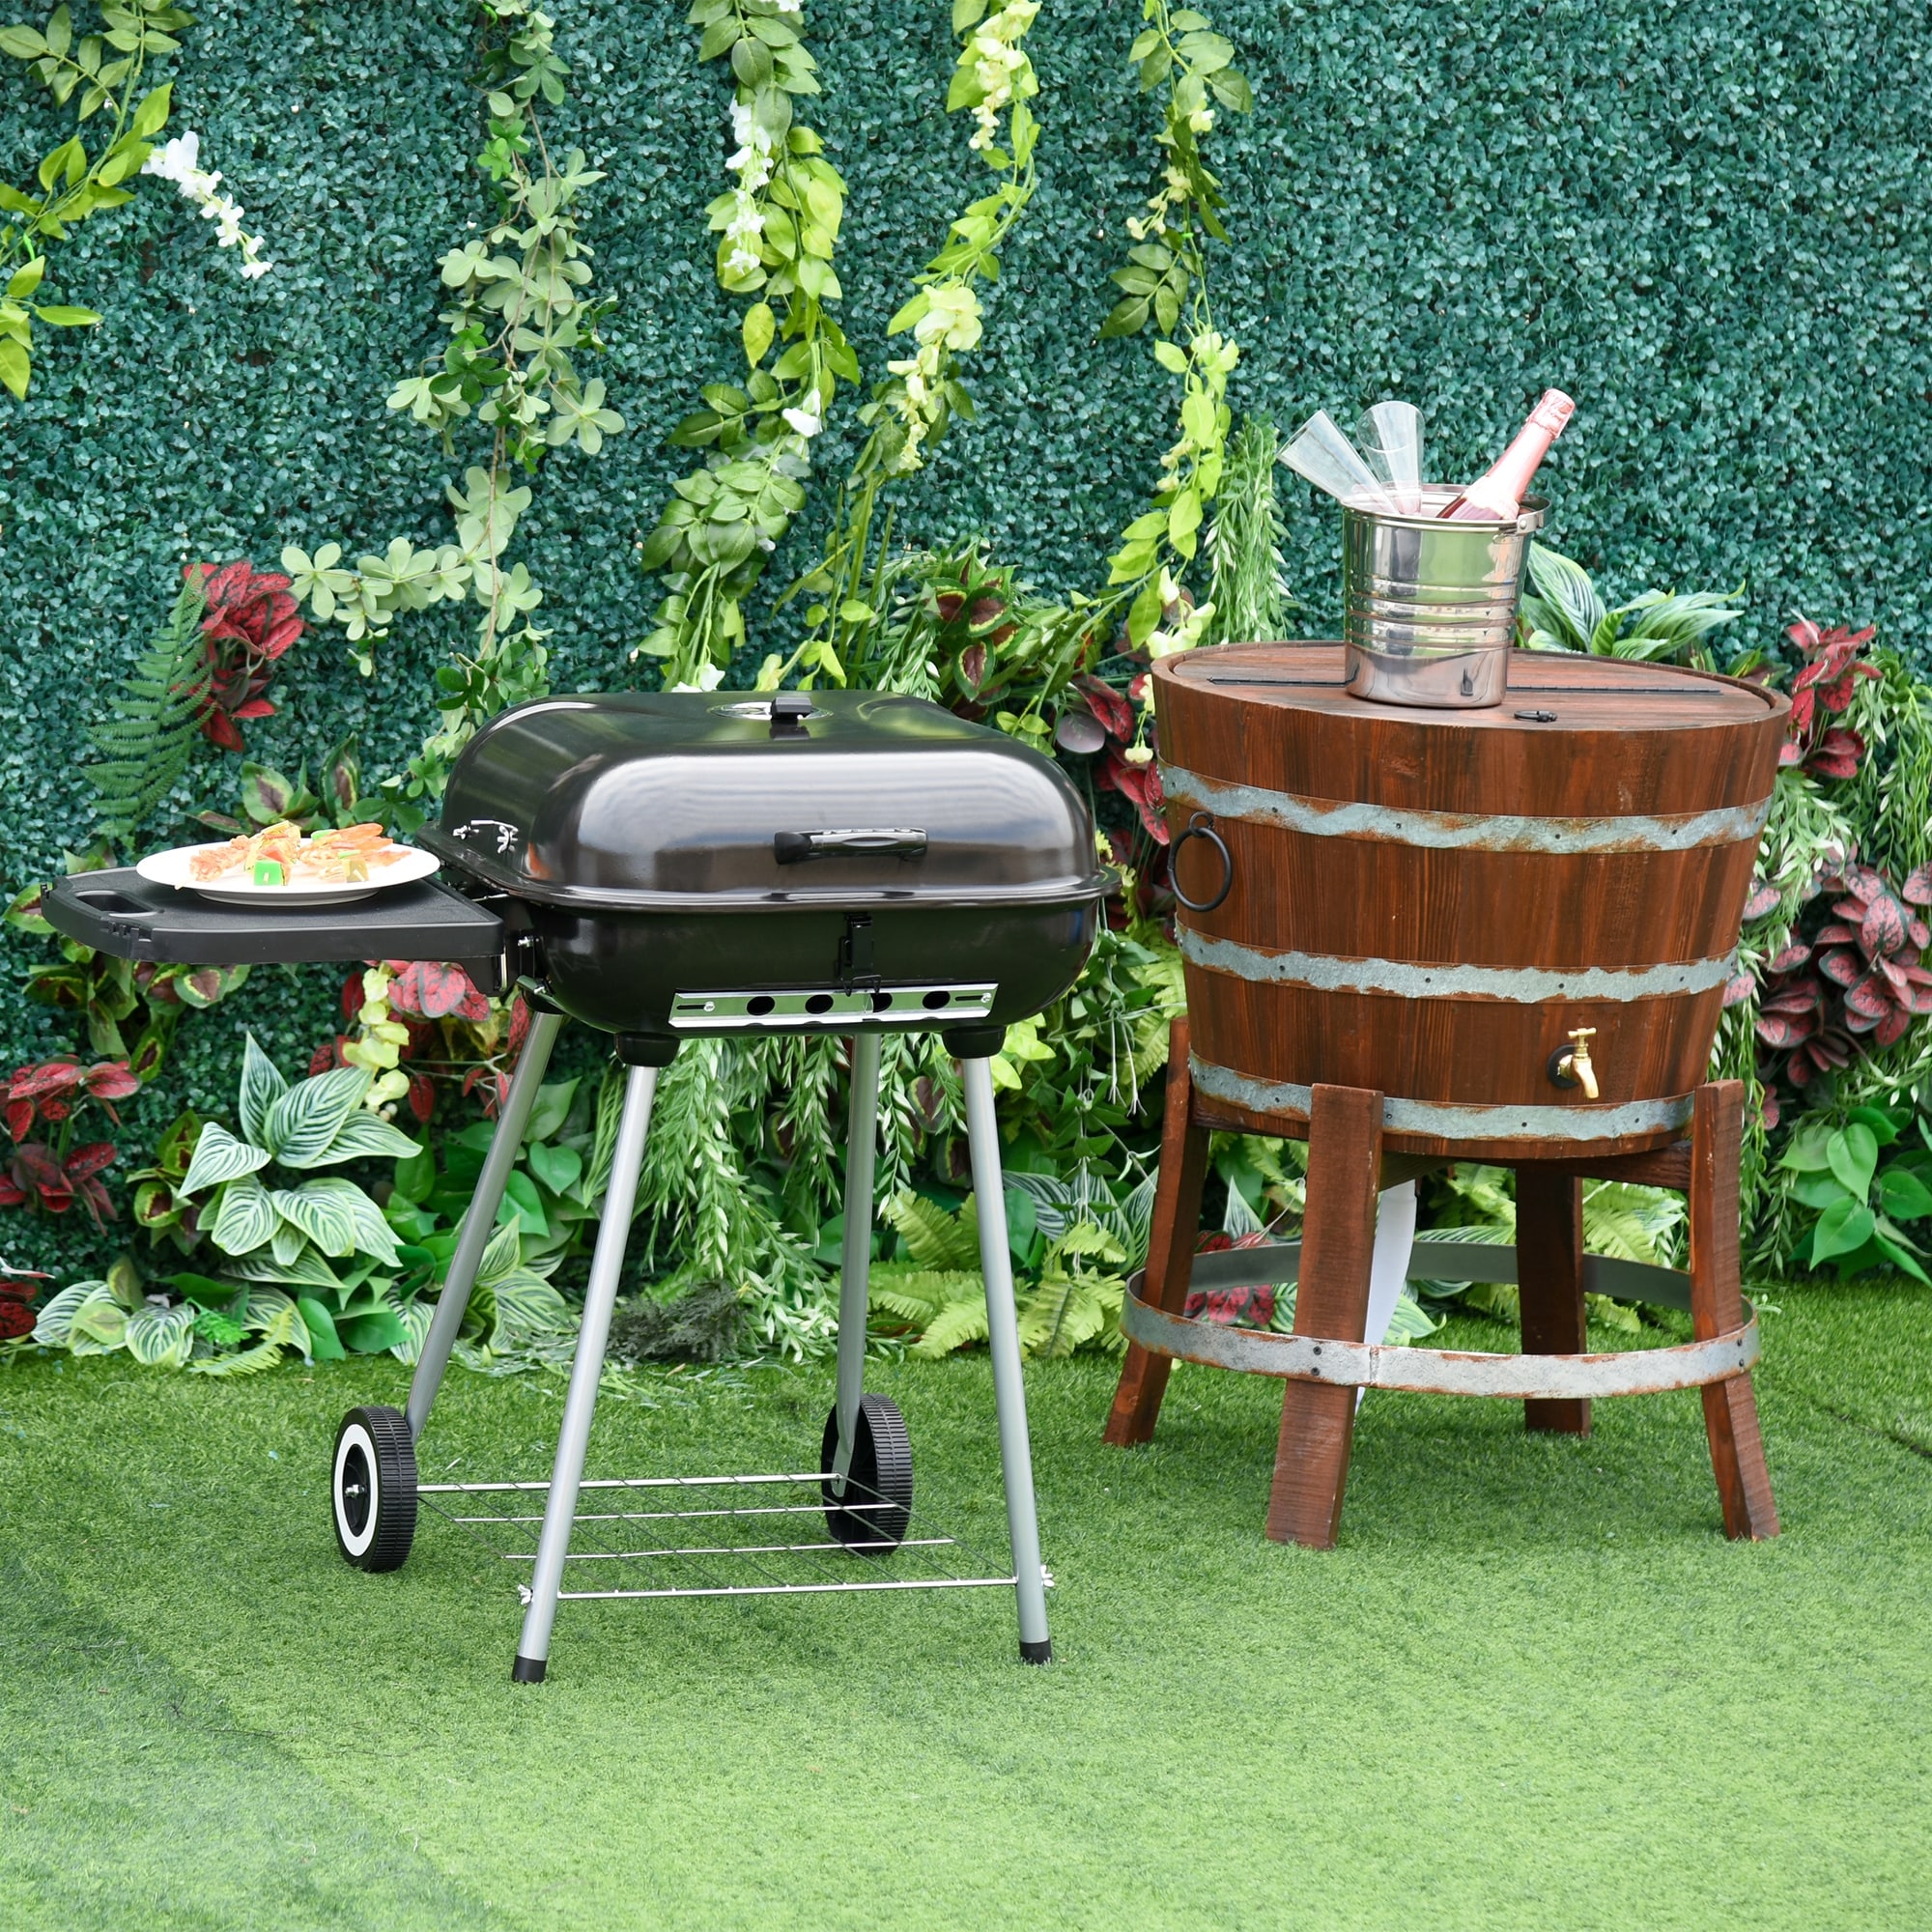 https://ak1.ostkcdn.com/images/products/is/images/direct/ed6b2892c92faa402f34ac465382f45ceb97ca6e/Outsunny-Steel-Portable-Outdoor-Charcoal-Barbecue-Grill.jpg